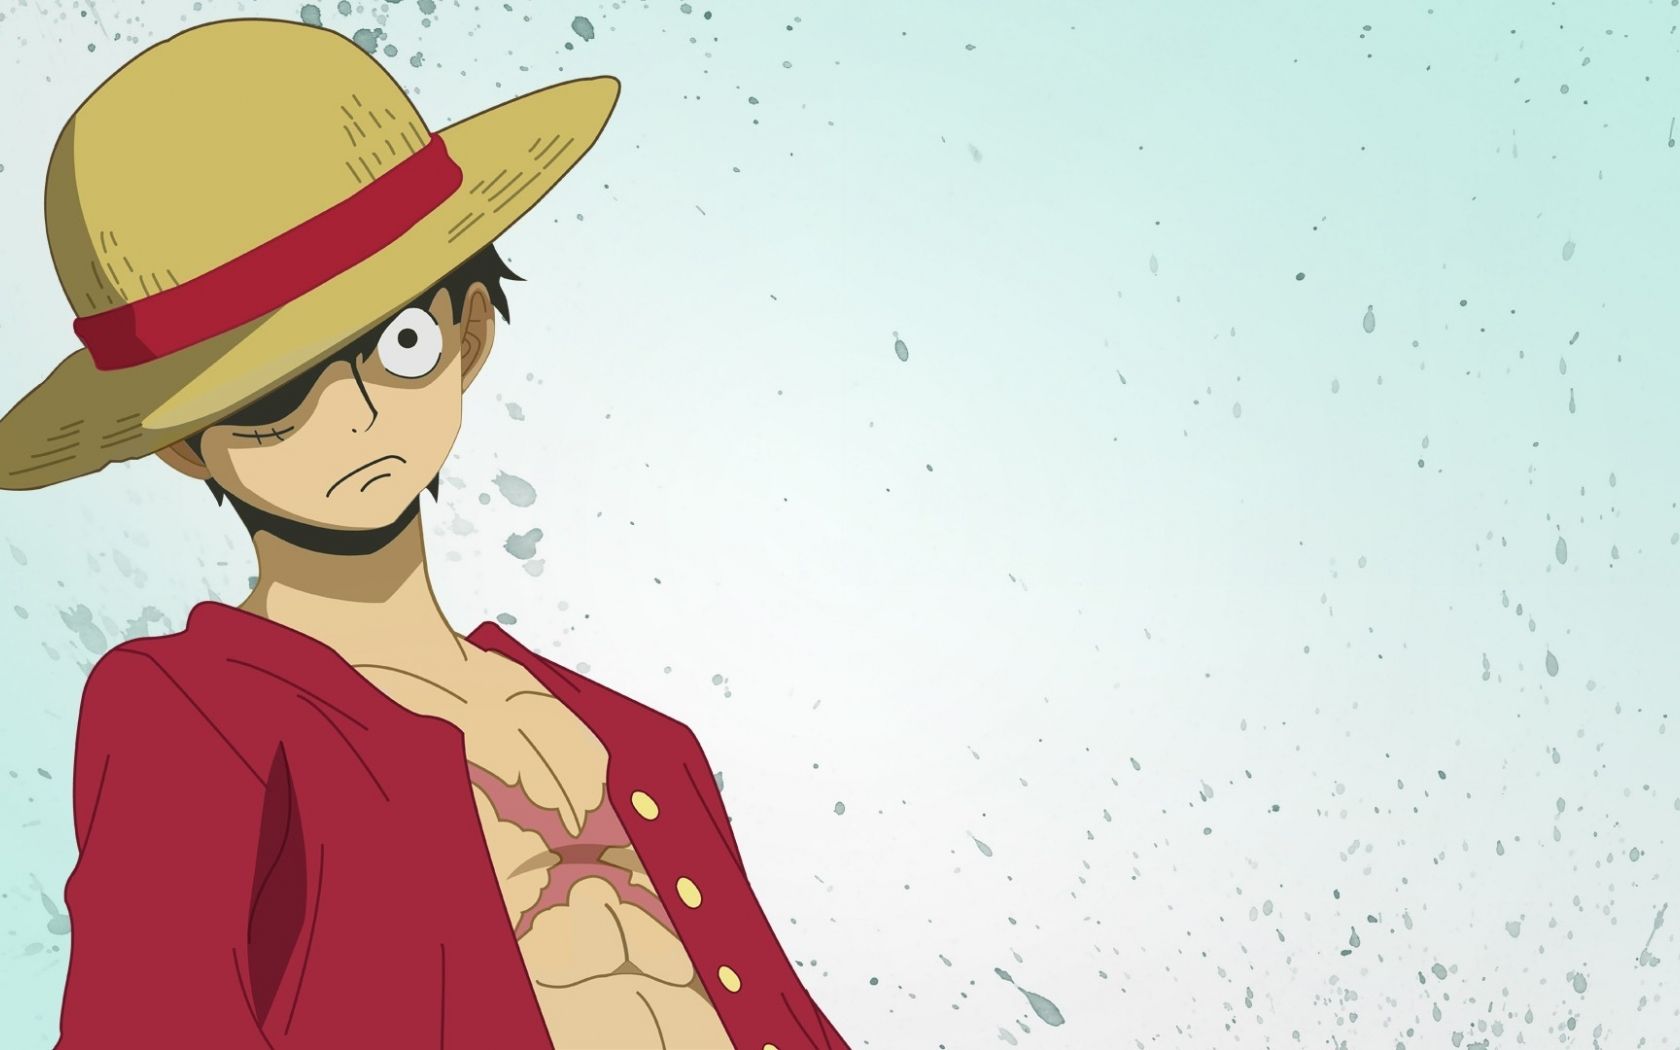 Free download One Piece Luffy Wallpaper High Res 5807 Wallpaper Cool [1920x1080] for your Desktop, Mobile & Tablet. Explore Luffy Wallpaper. One Piece Wallpaper Luffy, One Piece Desktop Wallpaper